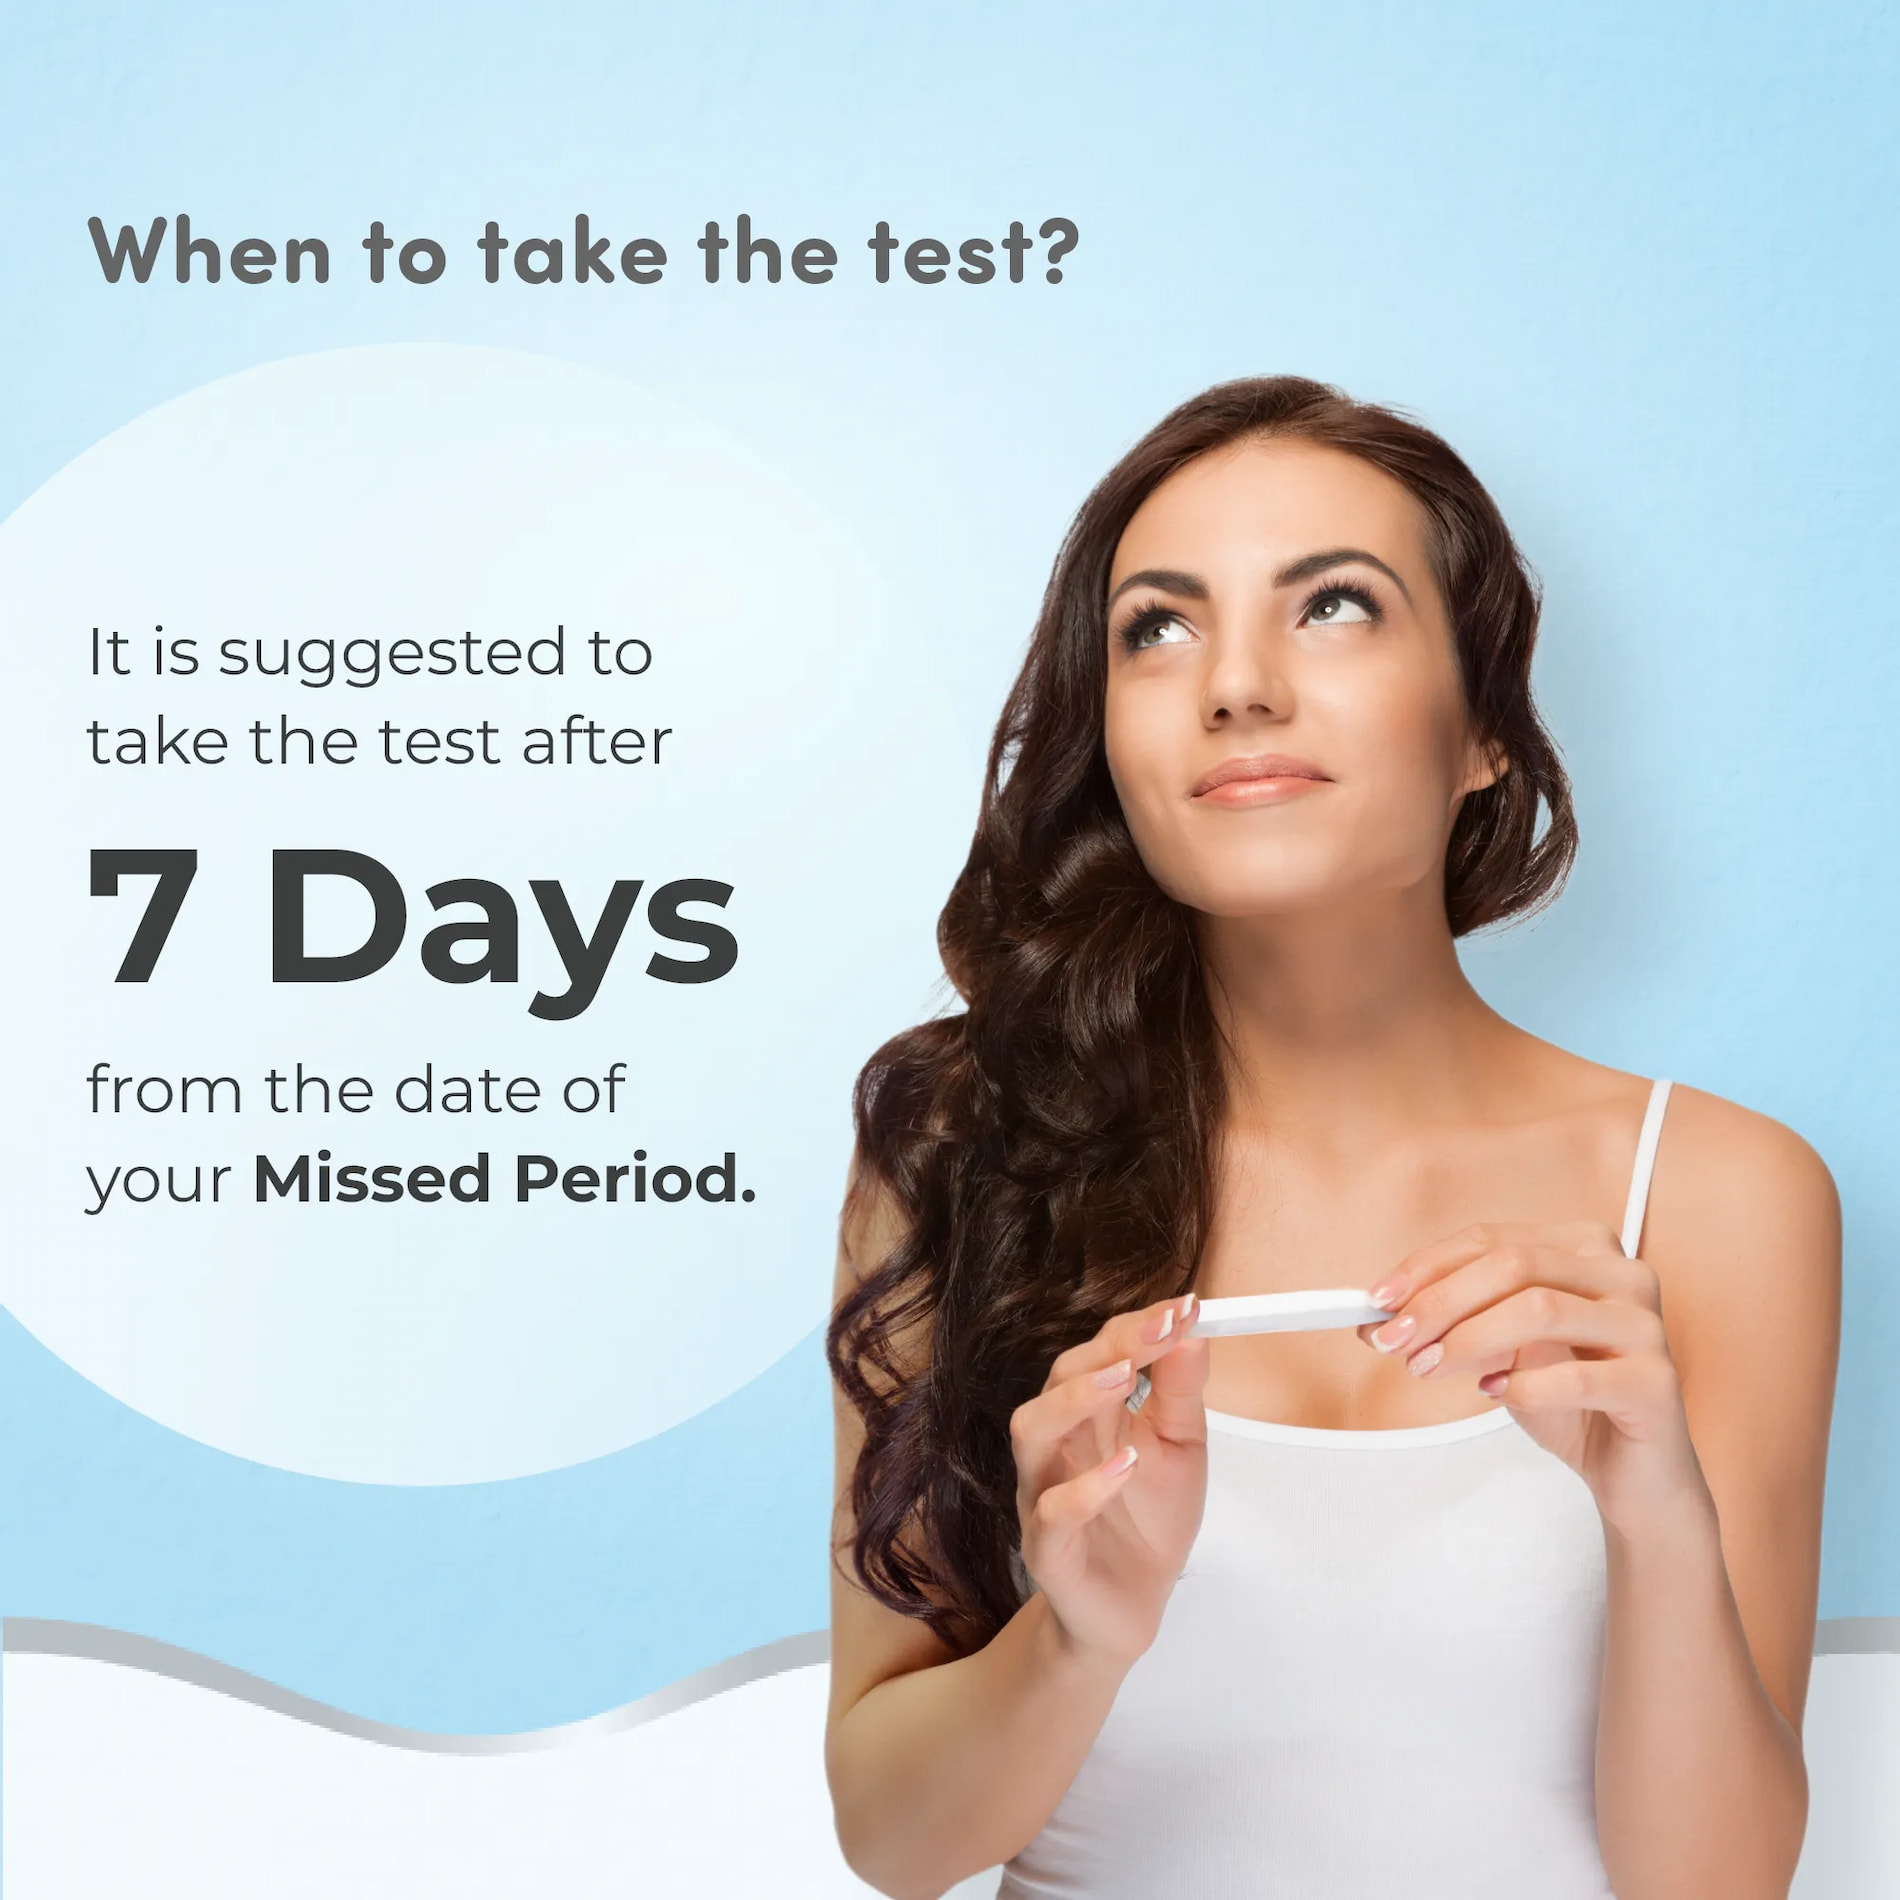 ExpectSure- Pregnancy Test Kit | Quick Results Within Minutes | Highly Accurate | Easy to Use | Helps Maintain Privacy - Pack of 3